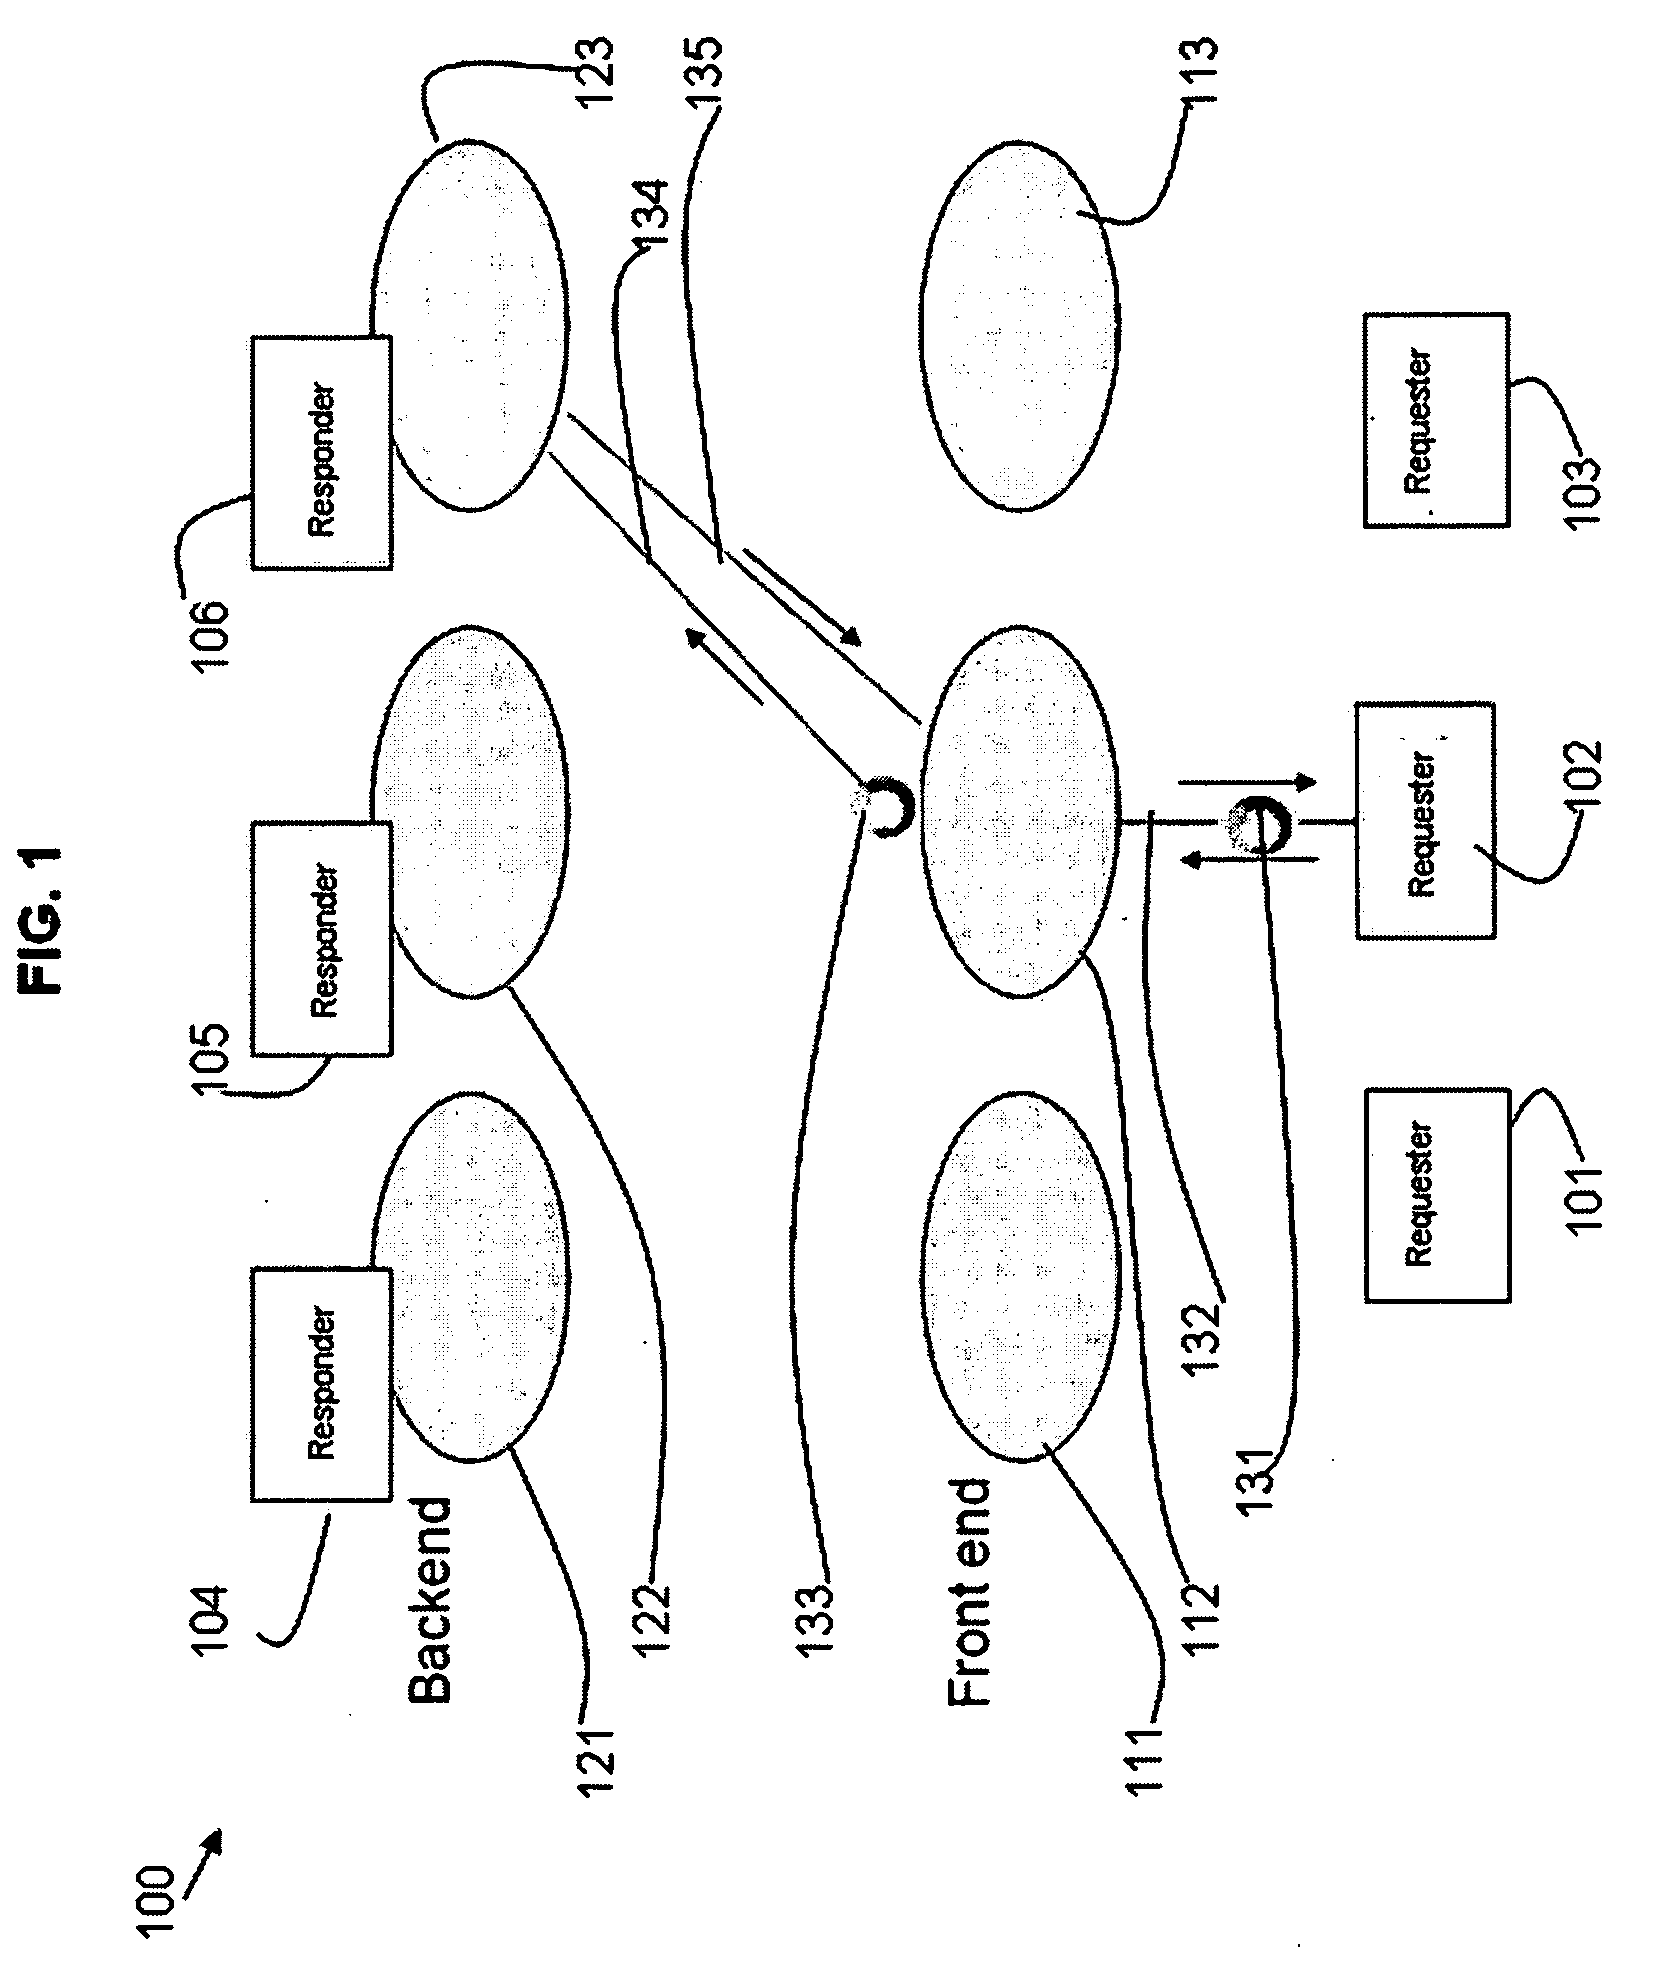 Method and system for message delivery in messaging networks